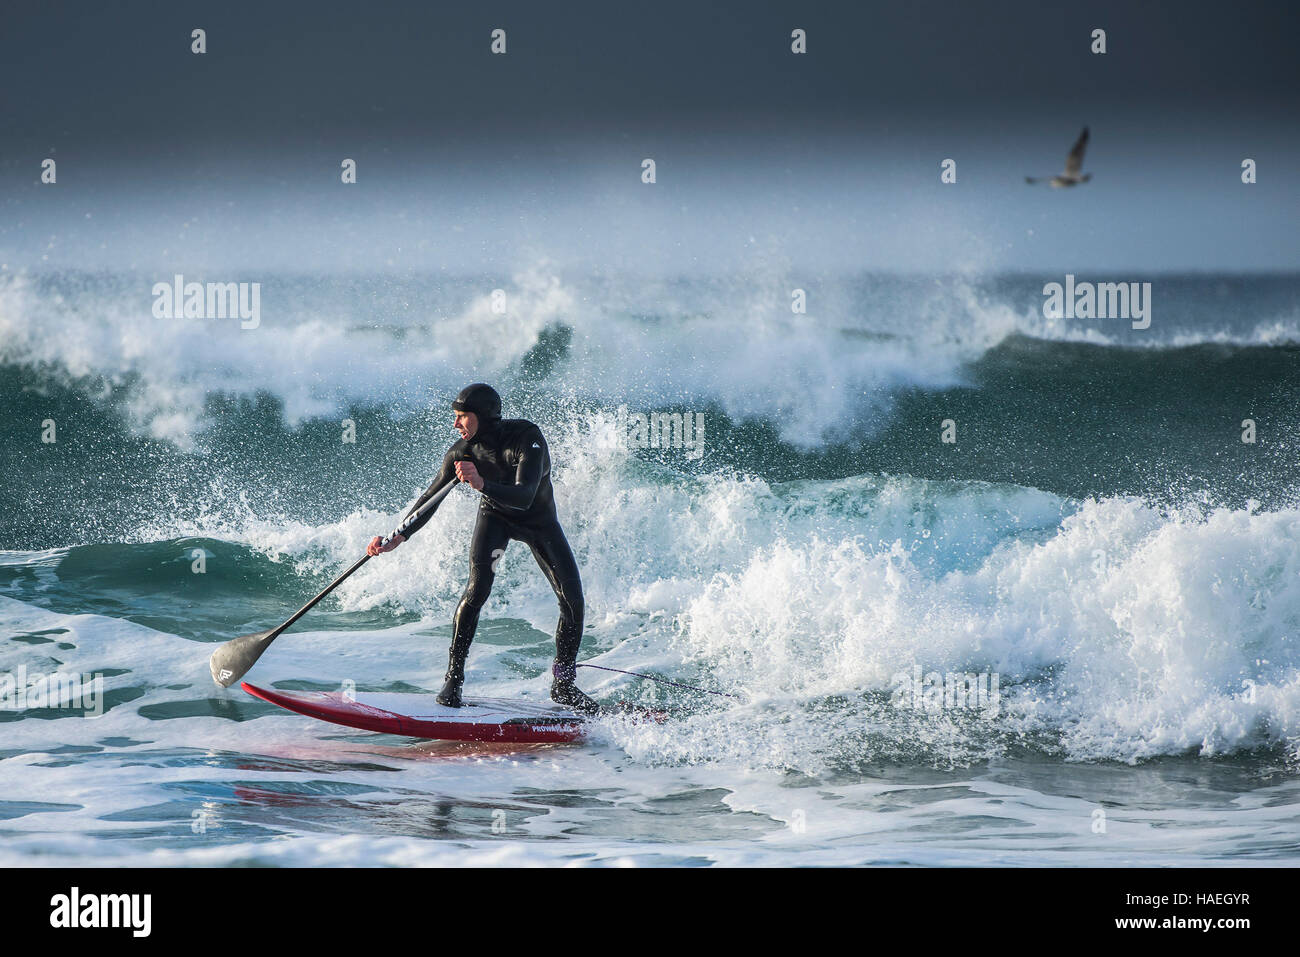 A paddle boarder surfing at Fistral in Newquay, Cornwall. UK. Stock Photo